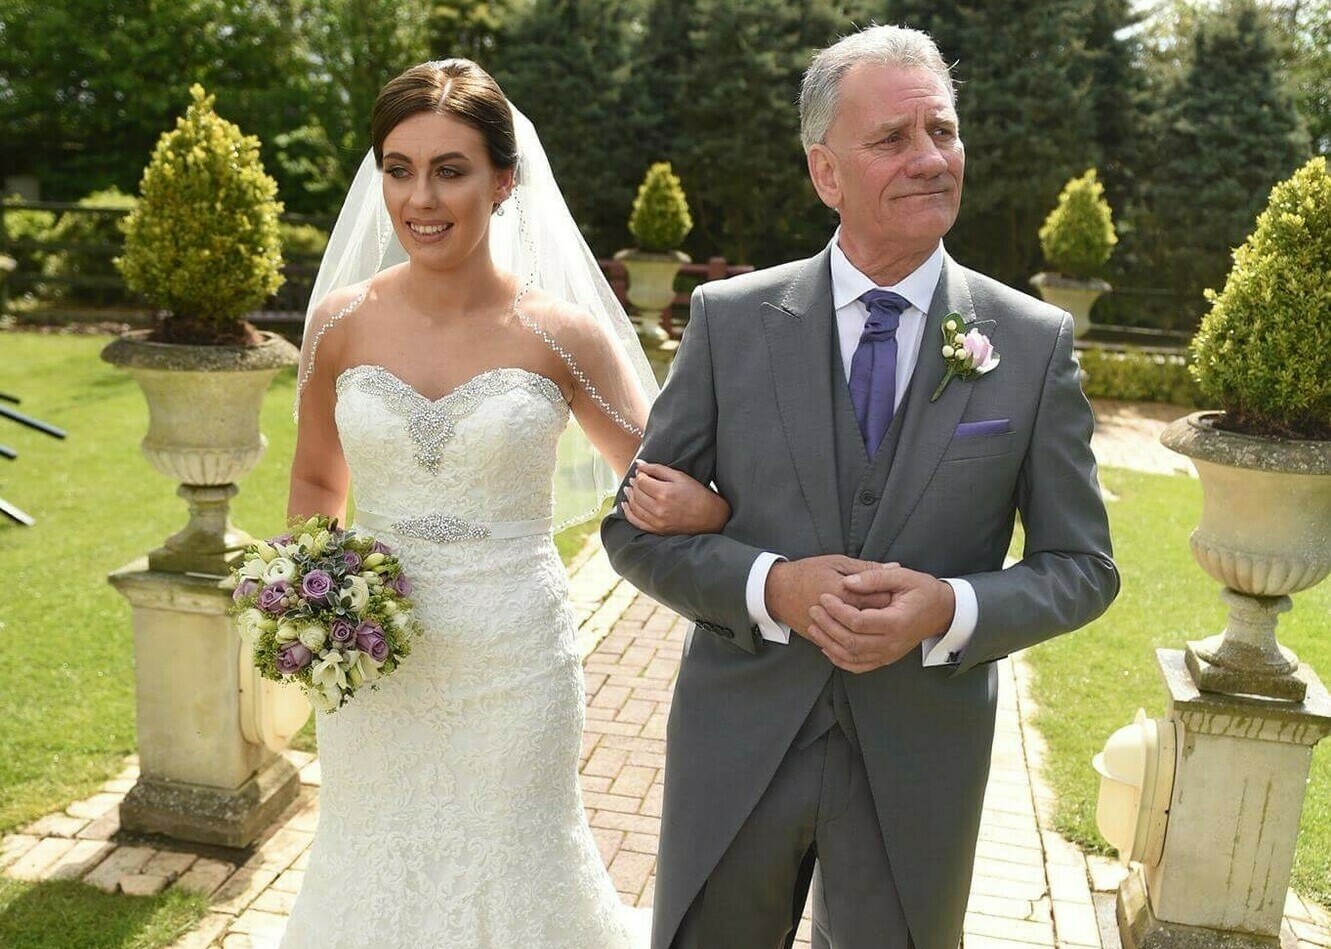 Mick Anderson and his daughter Katie May on her wedding day (cropped)